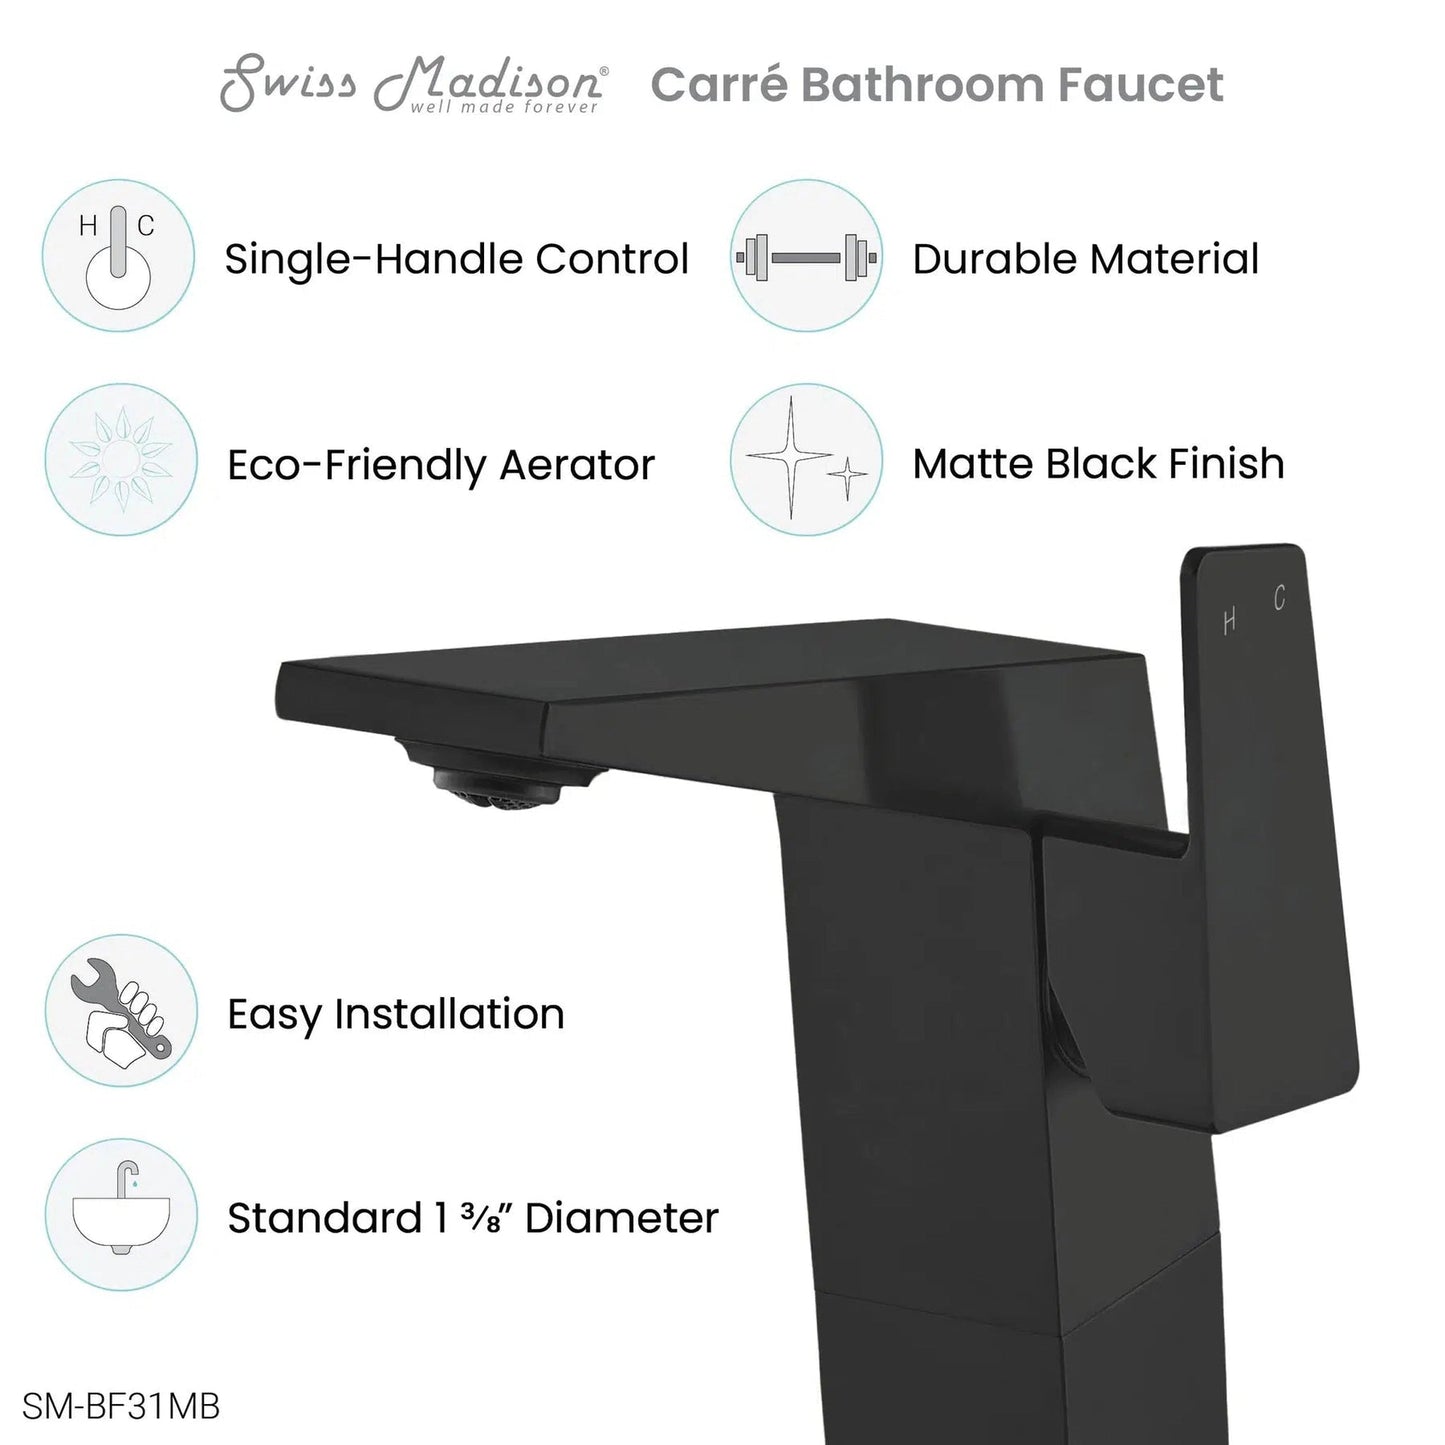 Swiss Madison Carré 9" Matte Black Single Hole Bathroom Faucet With Flow Rate of 1.2 GPM